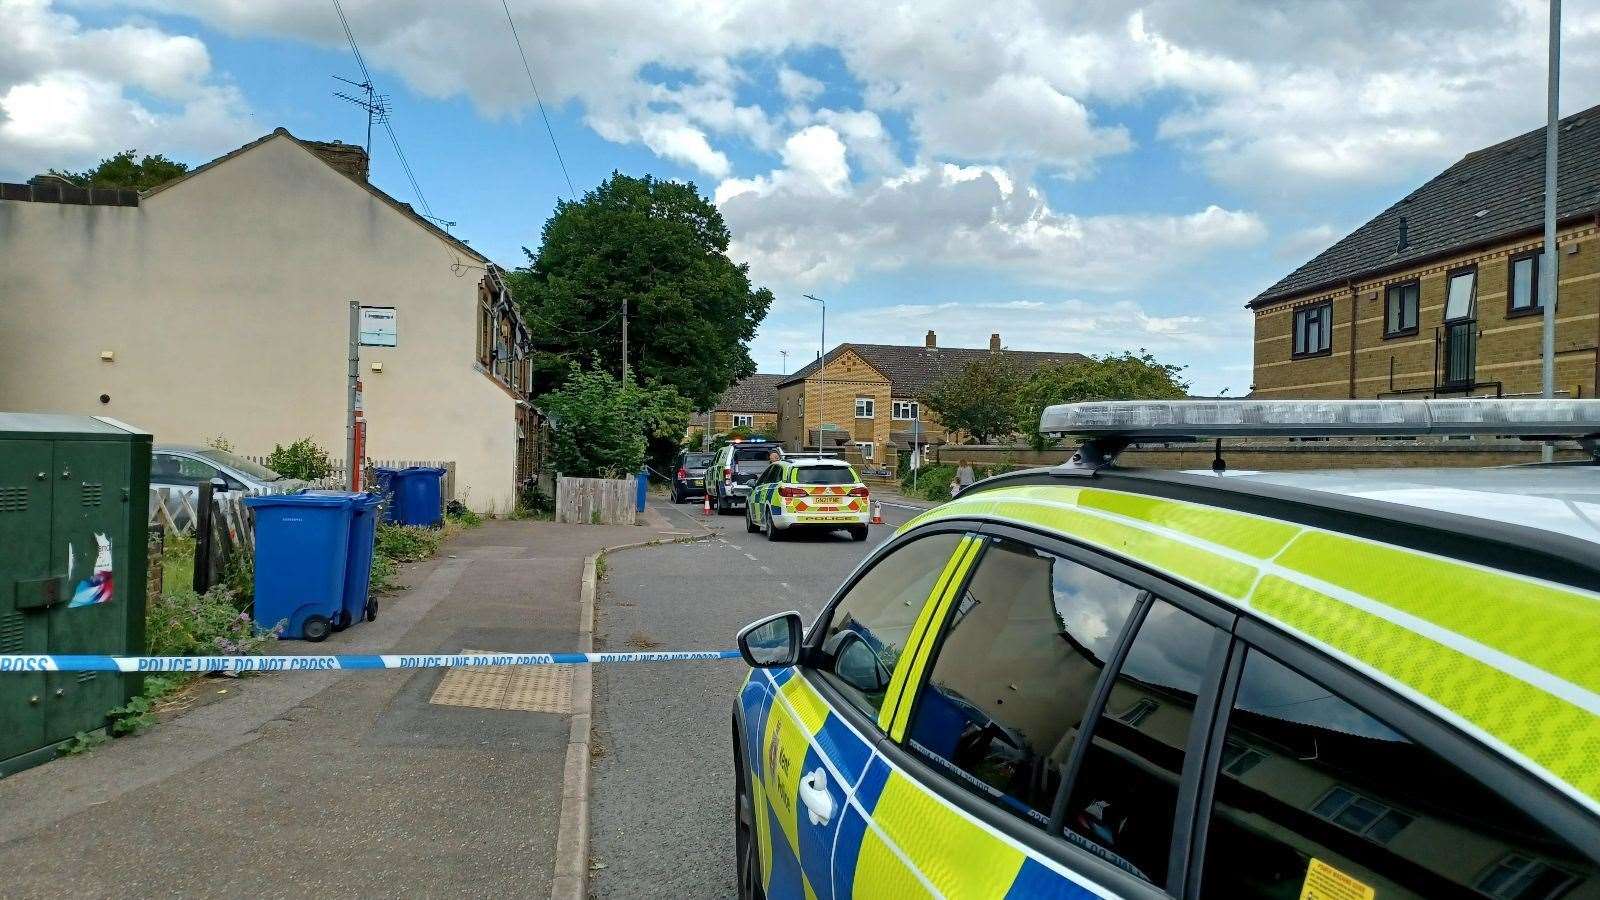 Police have been called to North Street in Milton Regis, Sittingbourne